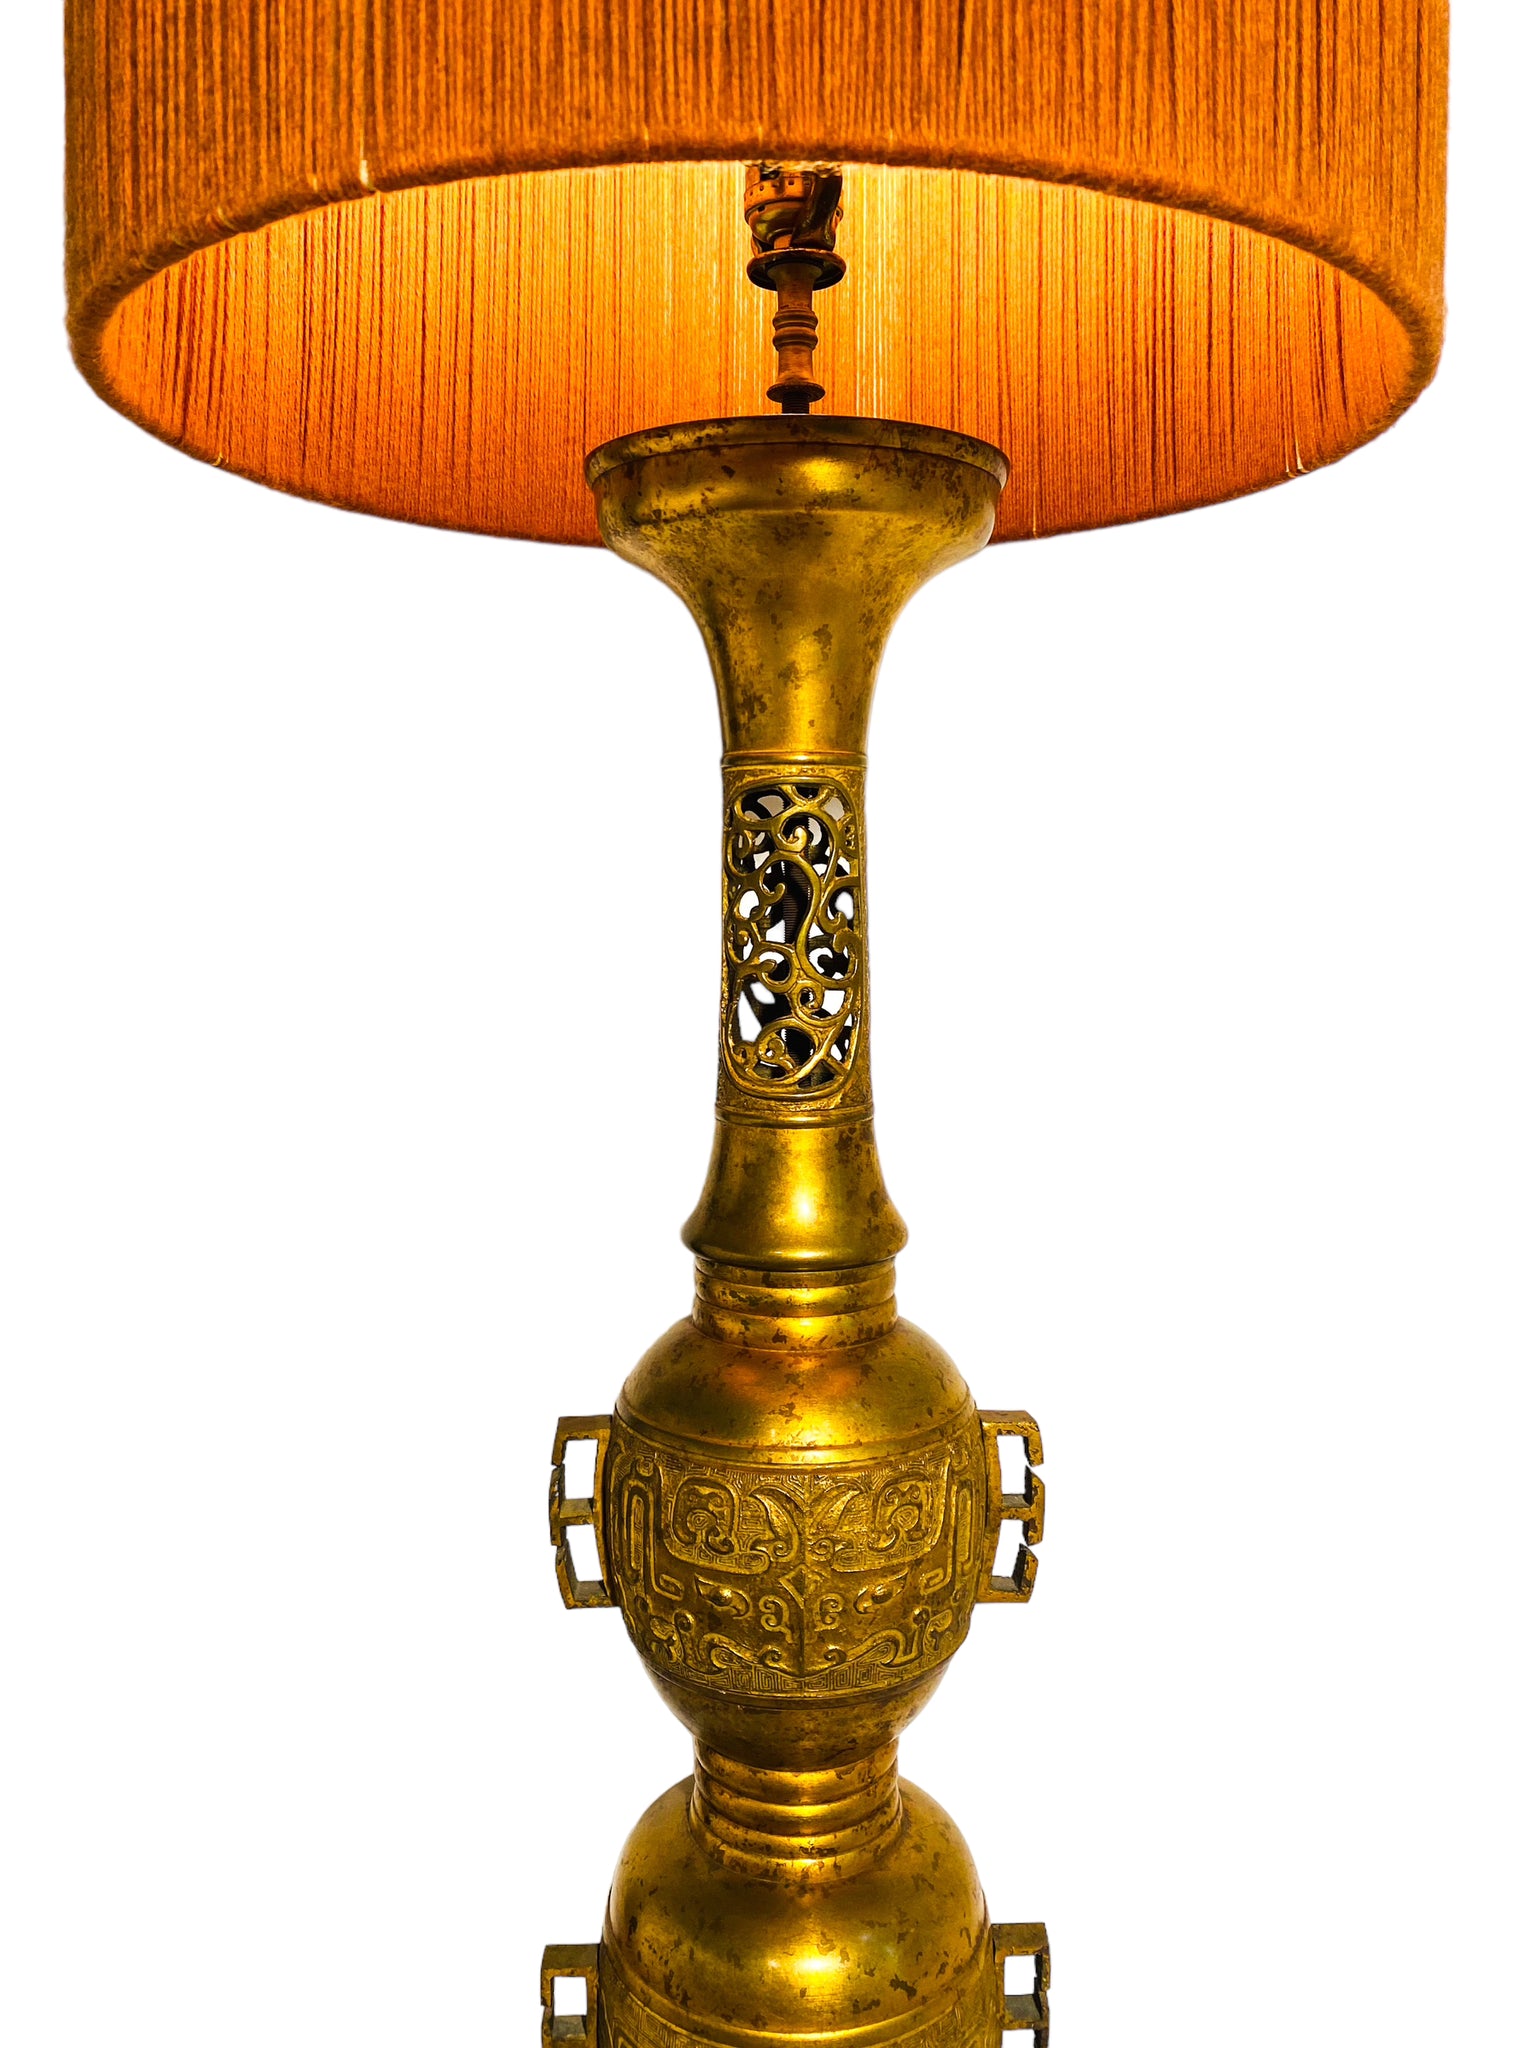 1950s Hollywood Regency James Mont Attributed Asian Brass Table Lamp, Local Pick Up Only**